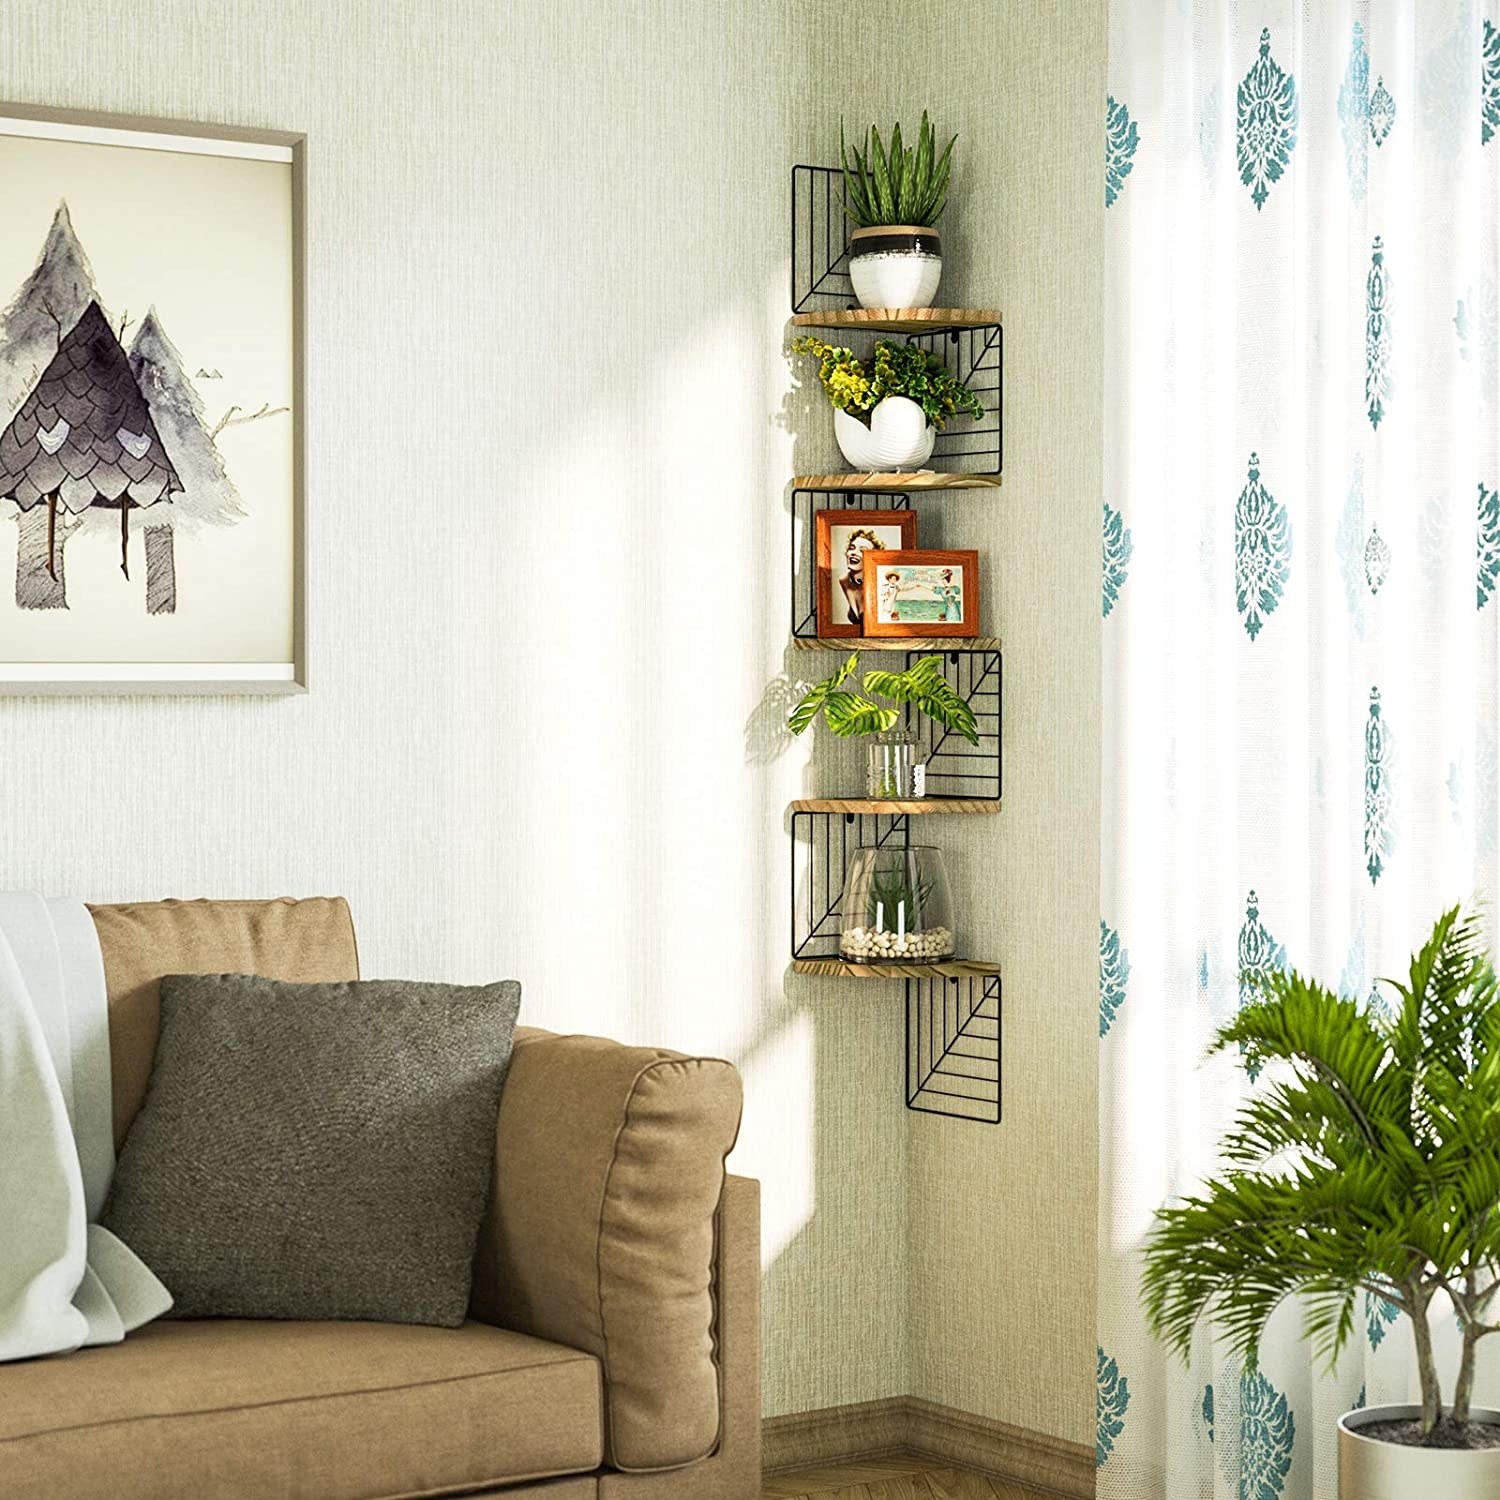 the shelf in a corner of a living space with plants and decor on it